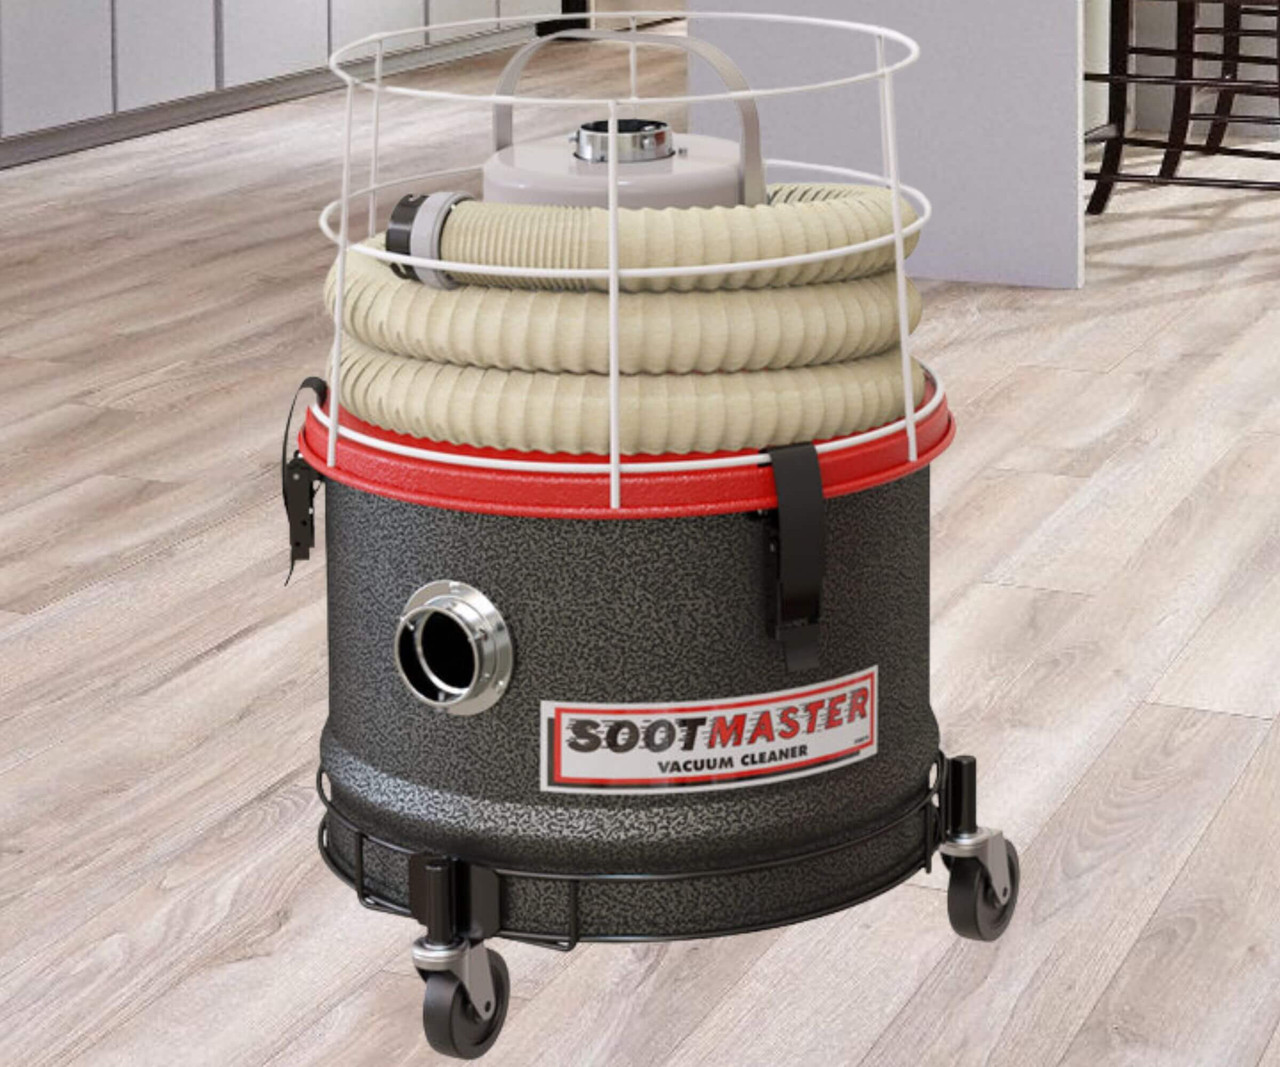 Mastercraft SootMaster® 1/2 Bushel Furnace Cleaning Vacuum with Tool Kit - 1 hp Power for Thorough Furnace Cleaning